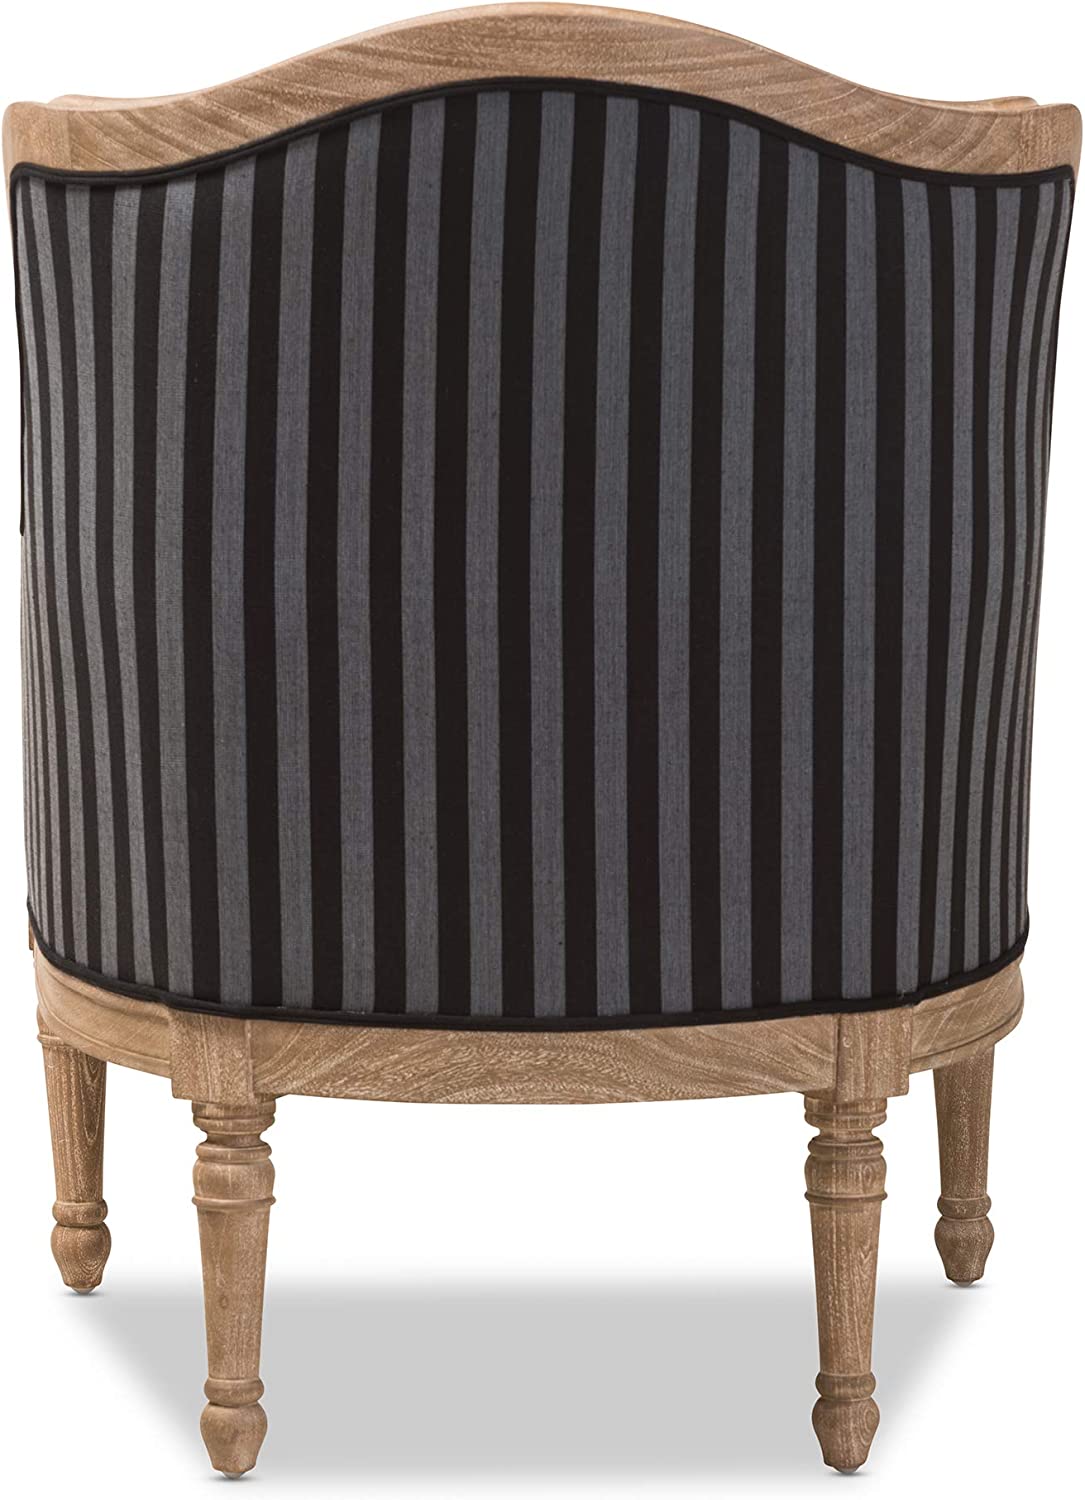 Baxton Studio Charlemagne Traditional French Black and Grey Striped Accent Chair